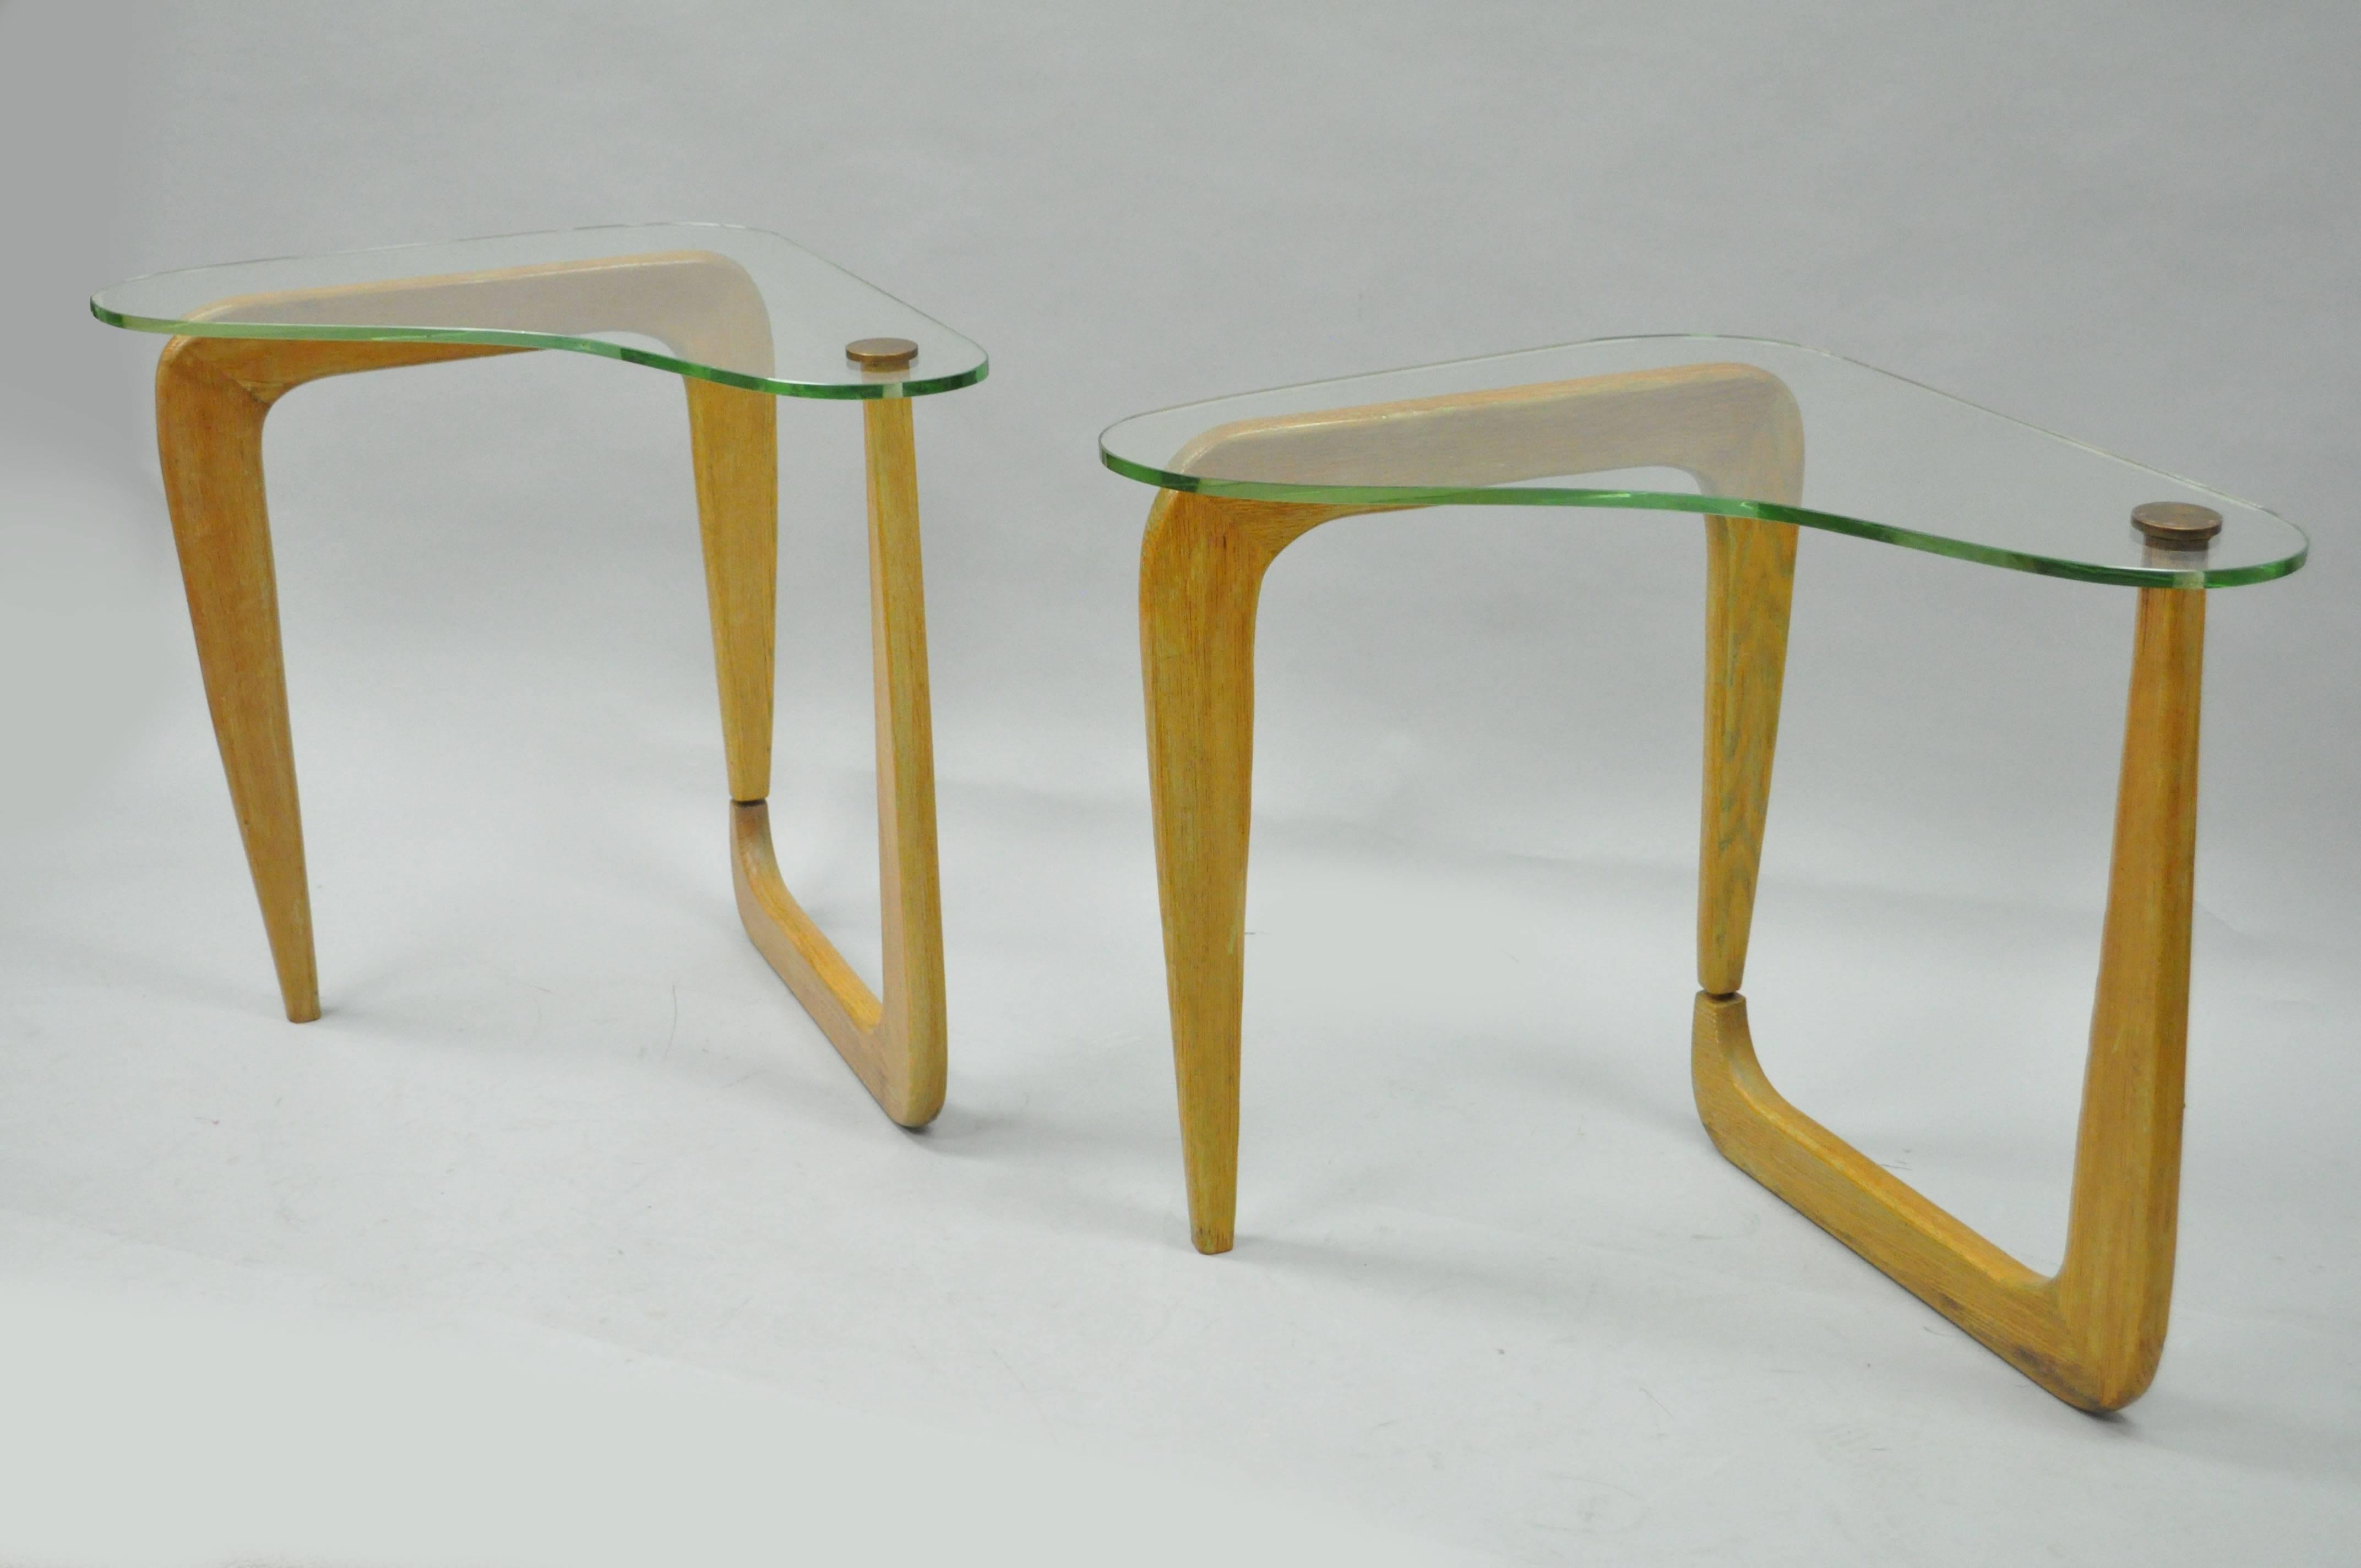 Tall pair of Vintage 1950s, Mid-Century Modern, cerused oak kidney shape end tables in the Isamu Noguchi style. Tables features solid cerused oak wood folding bases with an attractive green wash, thick removable kidney shape glass tops and round